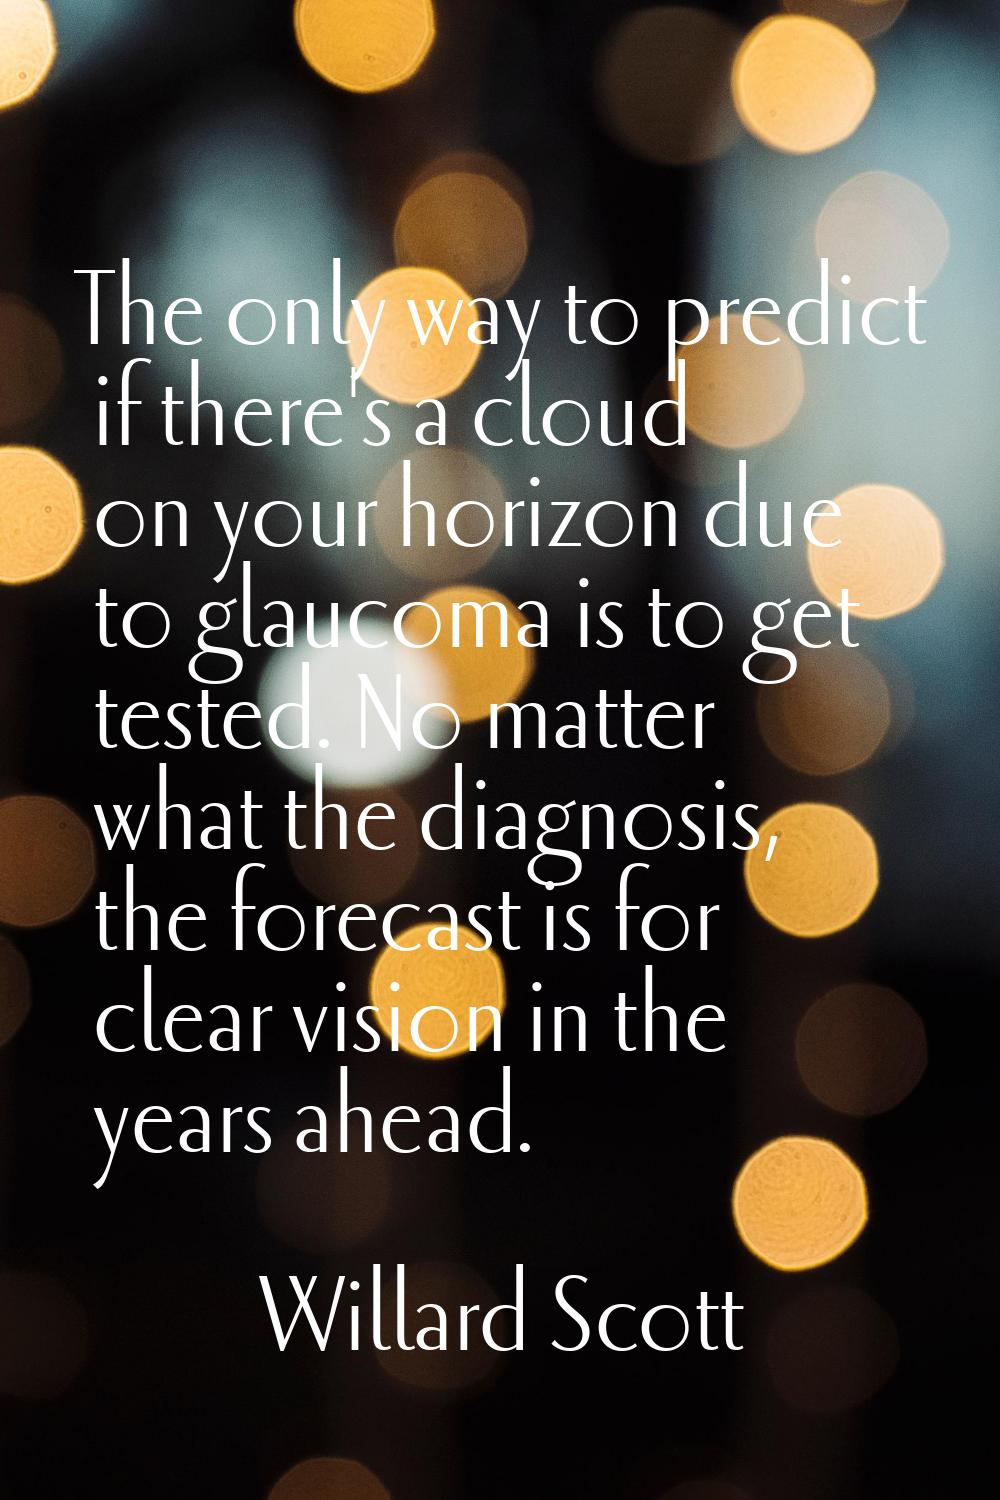 The only way to predict if there's a cloud on your horizon due to glaucoma is to get tested. No mat